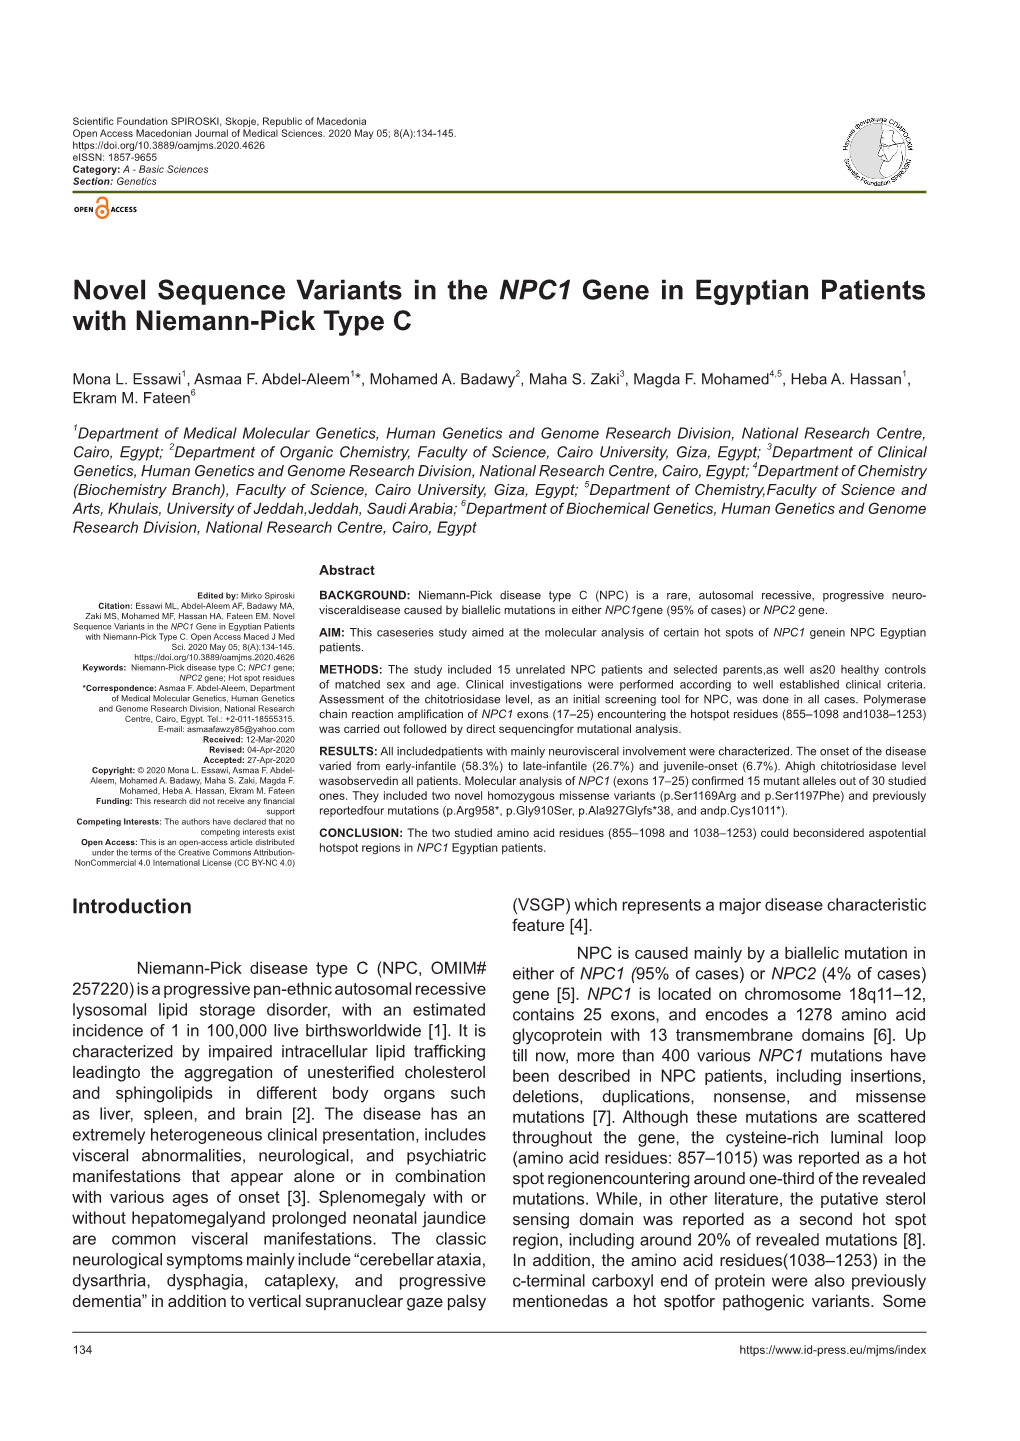 Novel Sequence Variants in the NPC1 Gene in Egyptian Patients with Niemann-Pick Type C